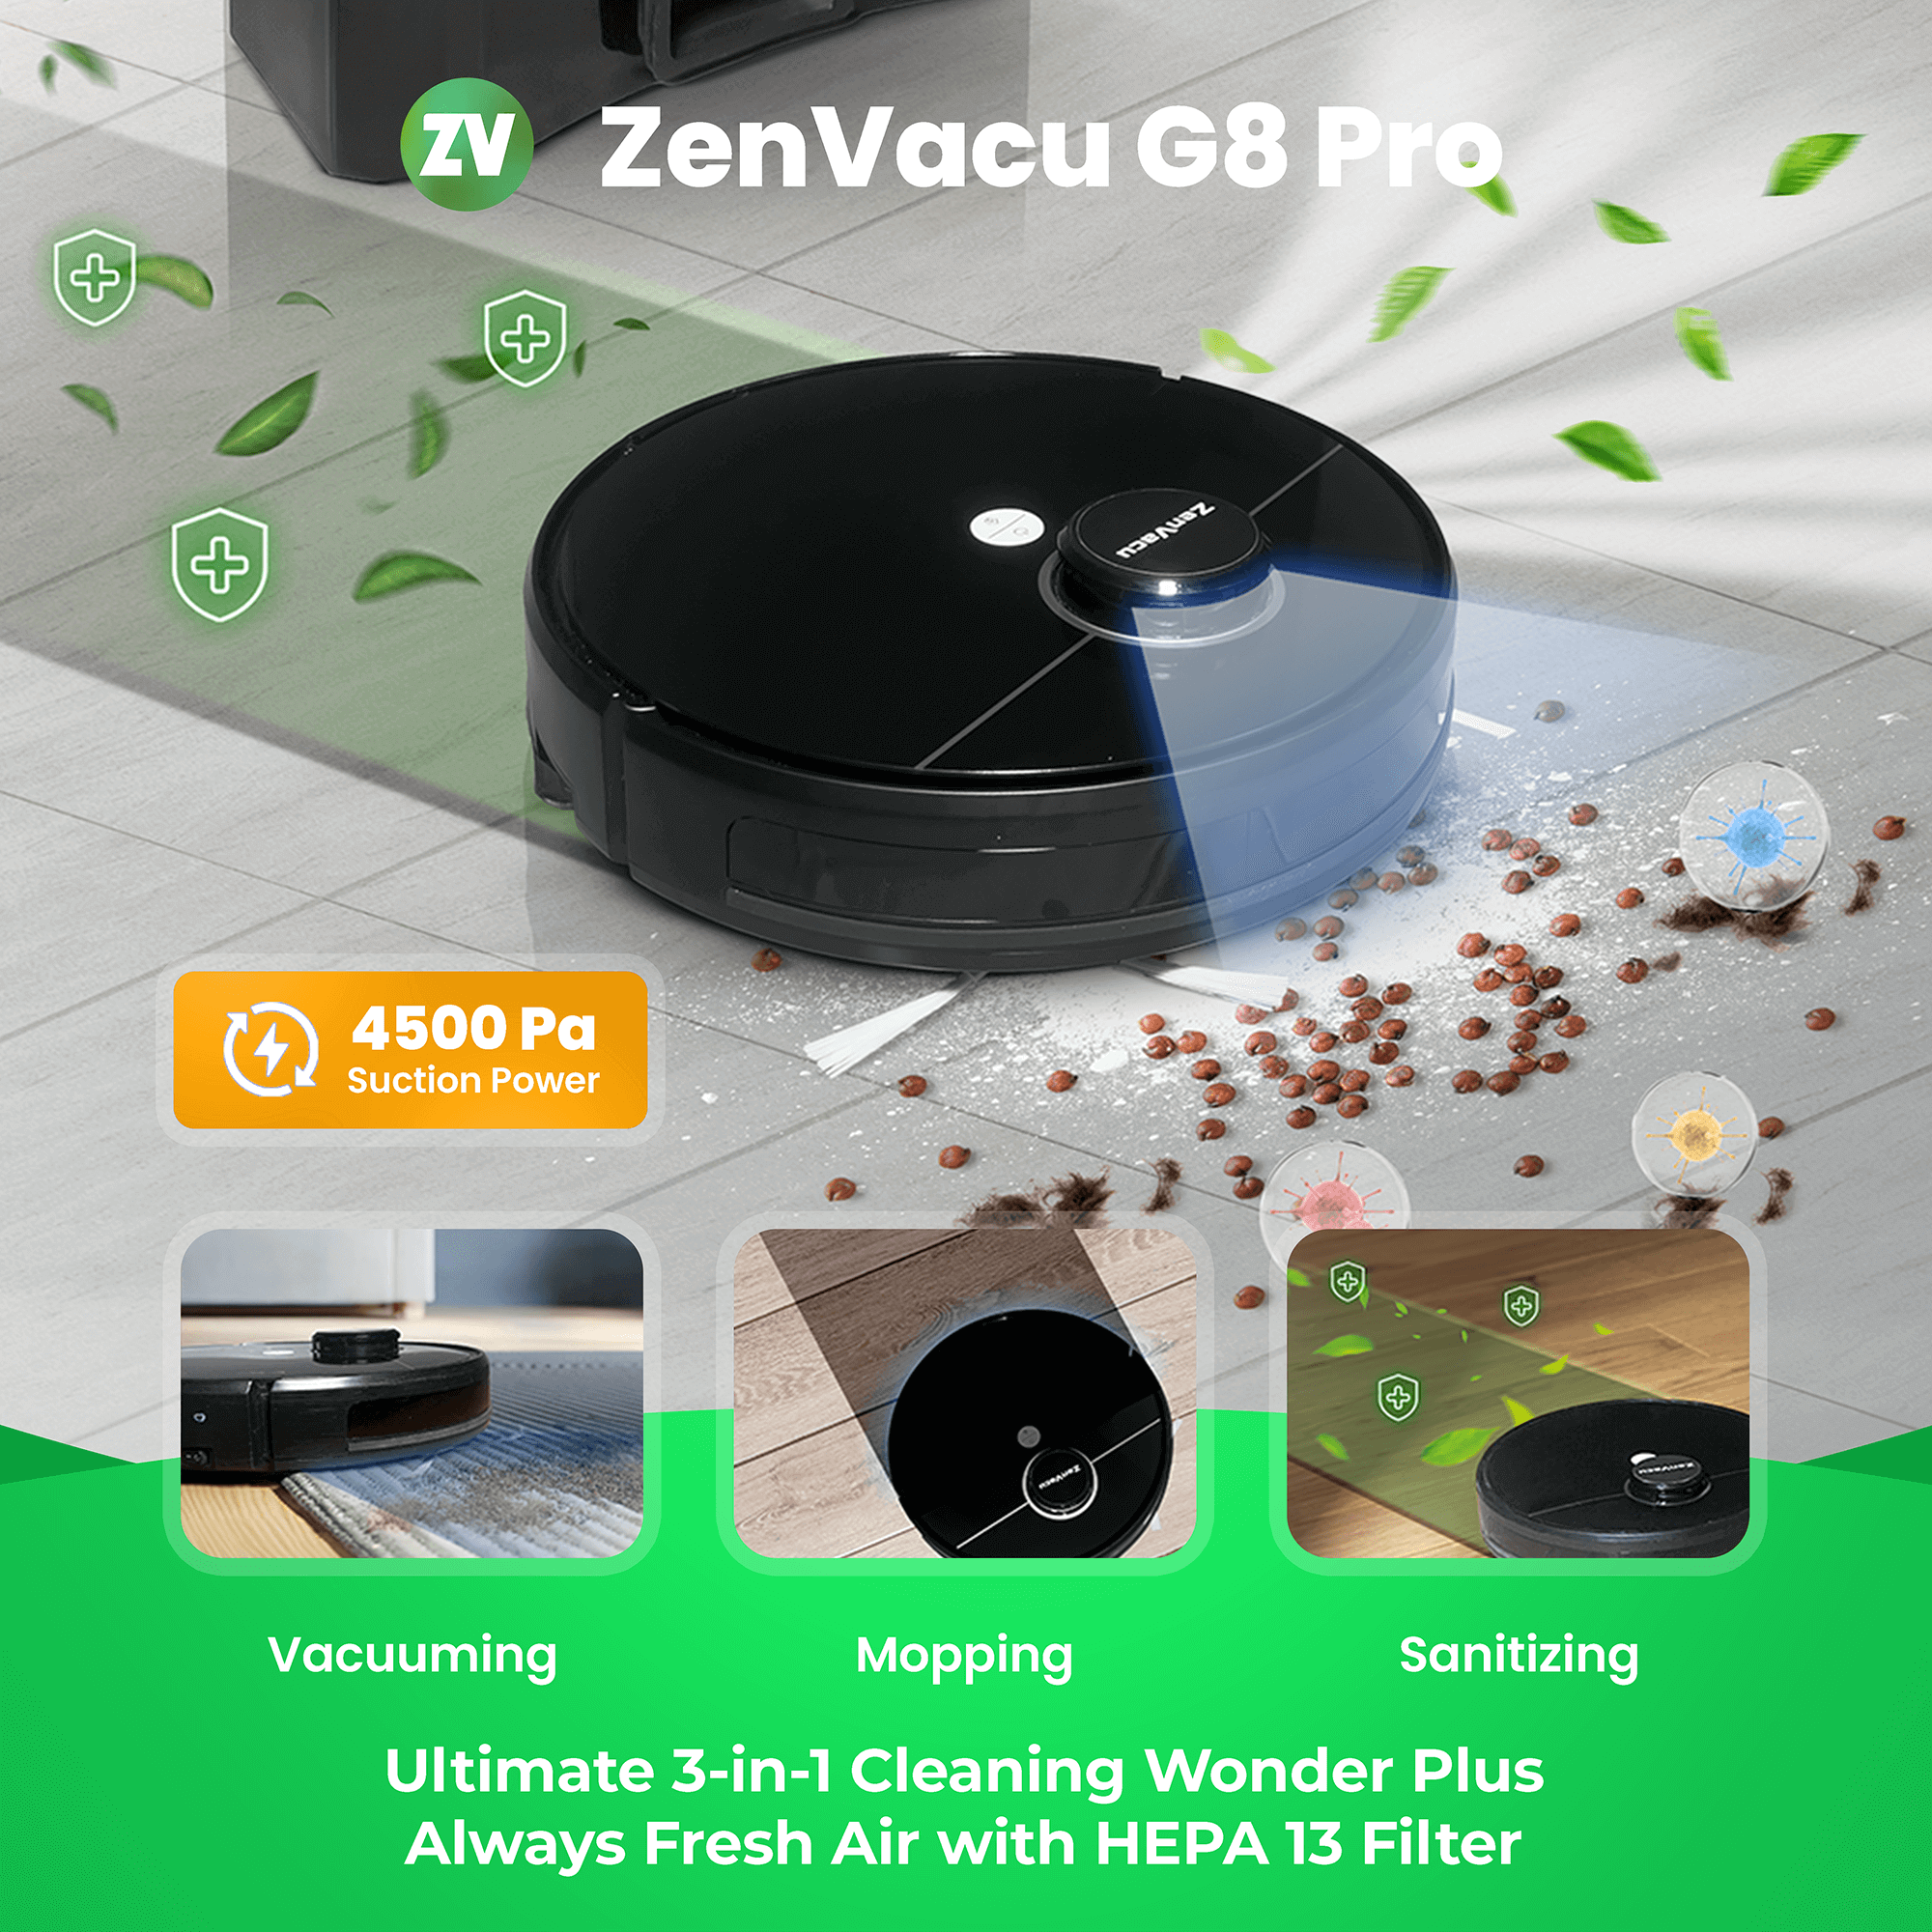 3-in-1 Vacuum Cleaner, ZenVacu G8 Pro Robot Vacuum: Vacuuming, Mopping, and Disinfecting with Self-Emptying Capability. Plus, it purifies the air with its Hepa 13 Filter.